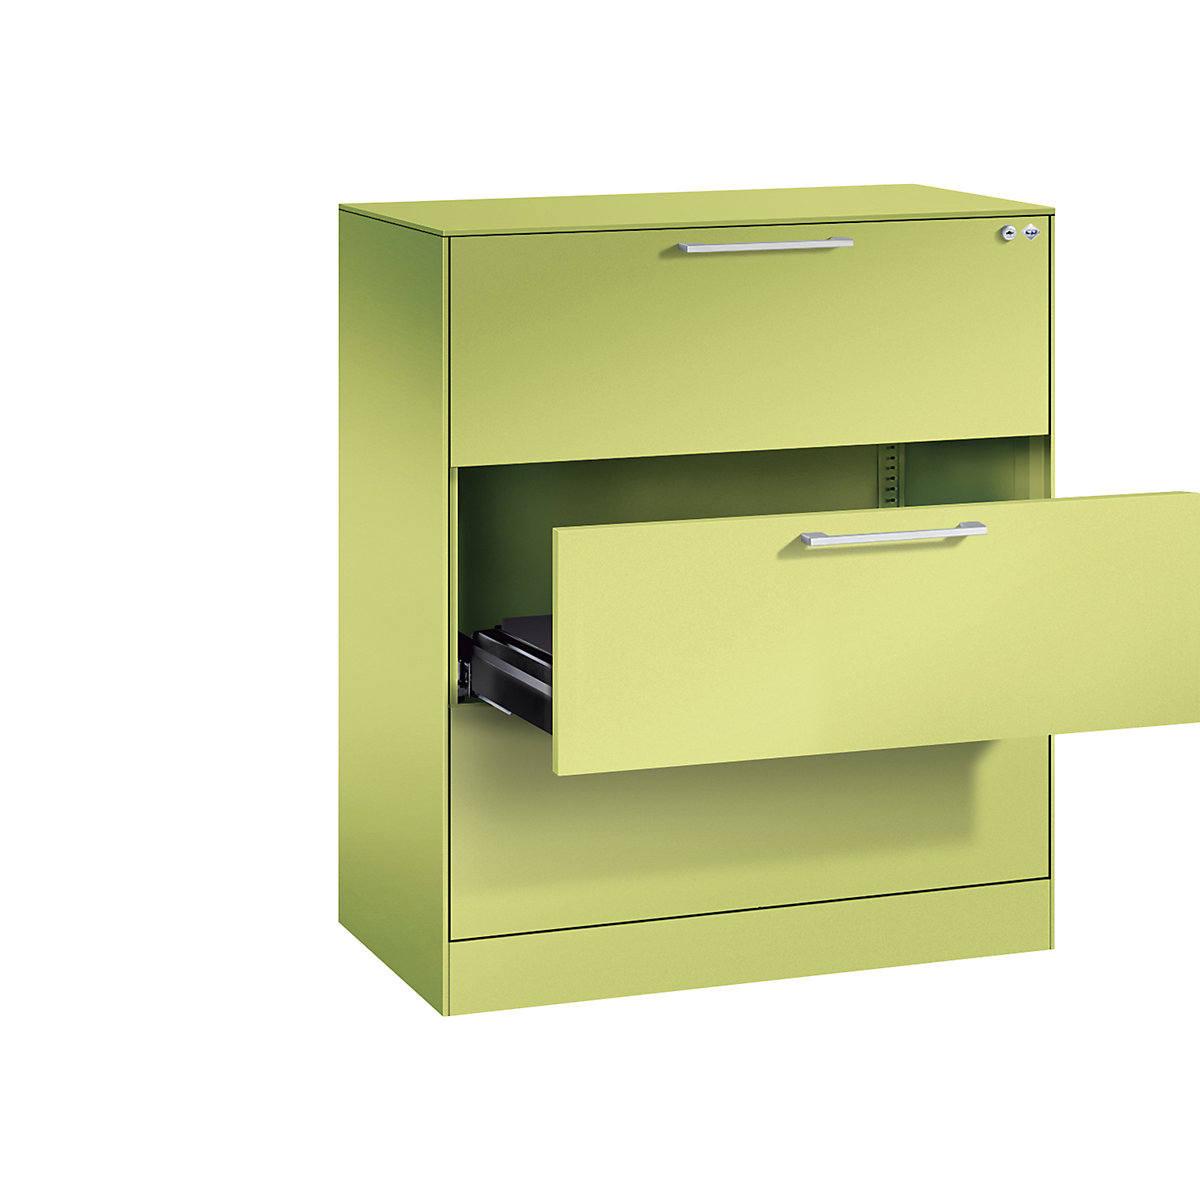 ASISTO card file cabinet – C+P, height 992 mm, with 3 drawers, A4 landscape, viridian green/viridian green-16